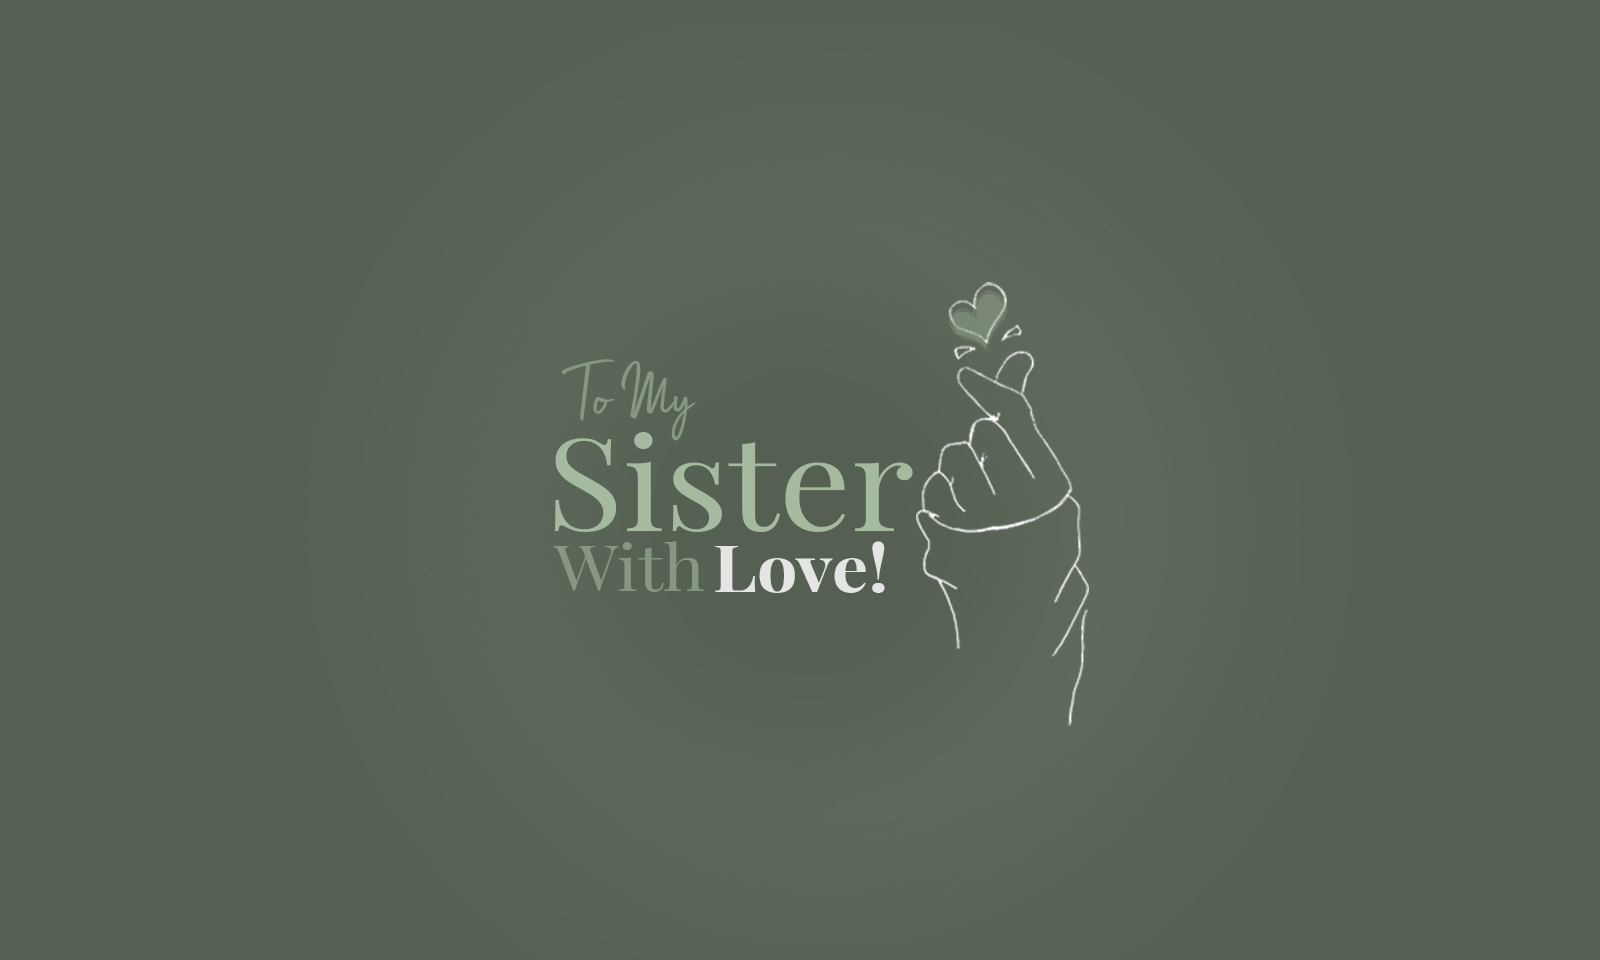 To My Sis… With Love! djjs blog